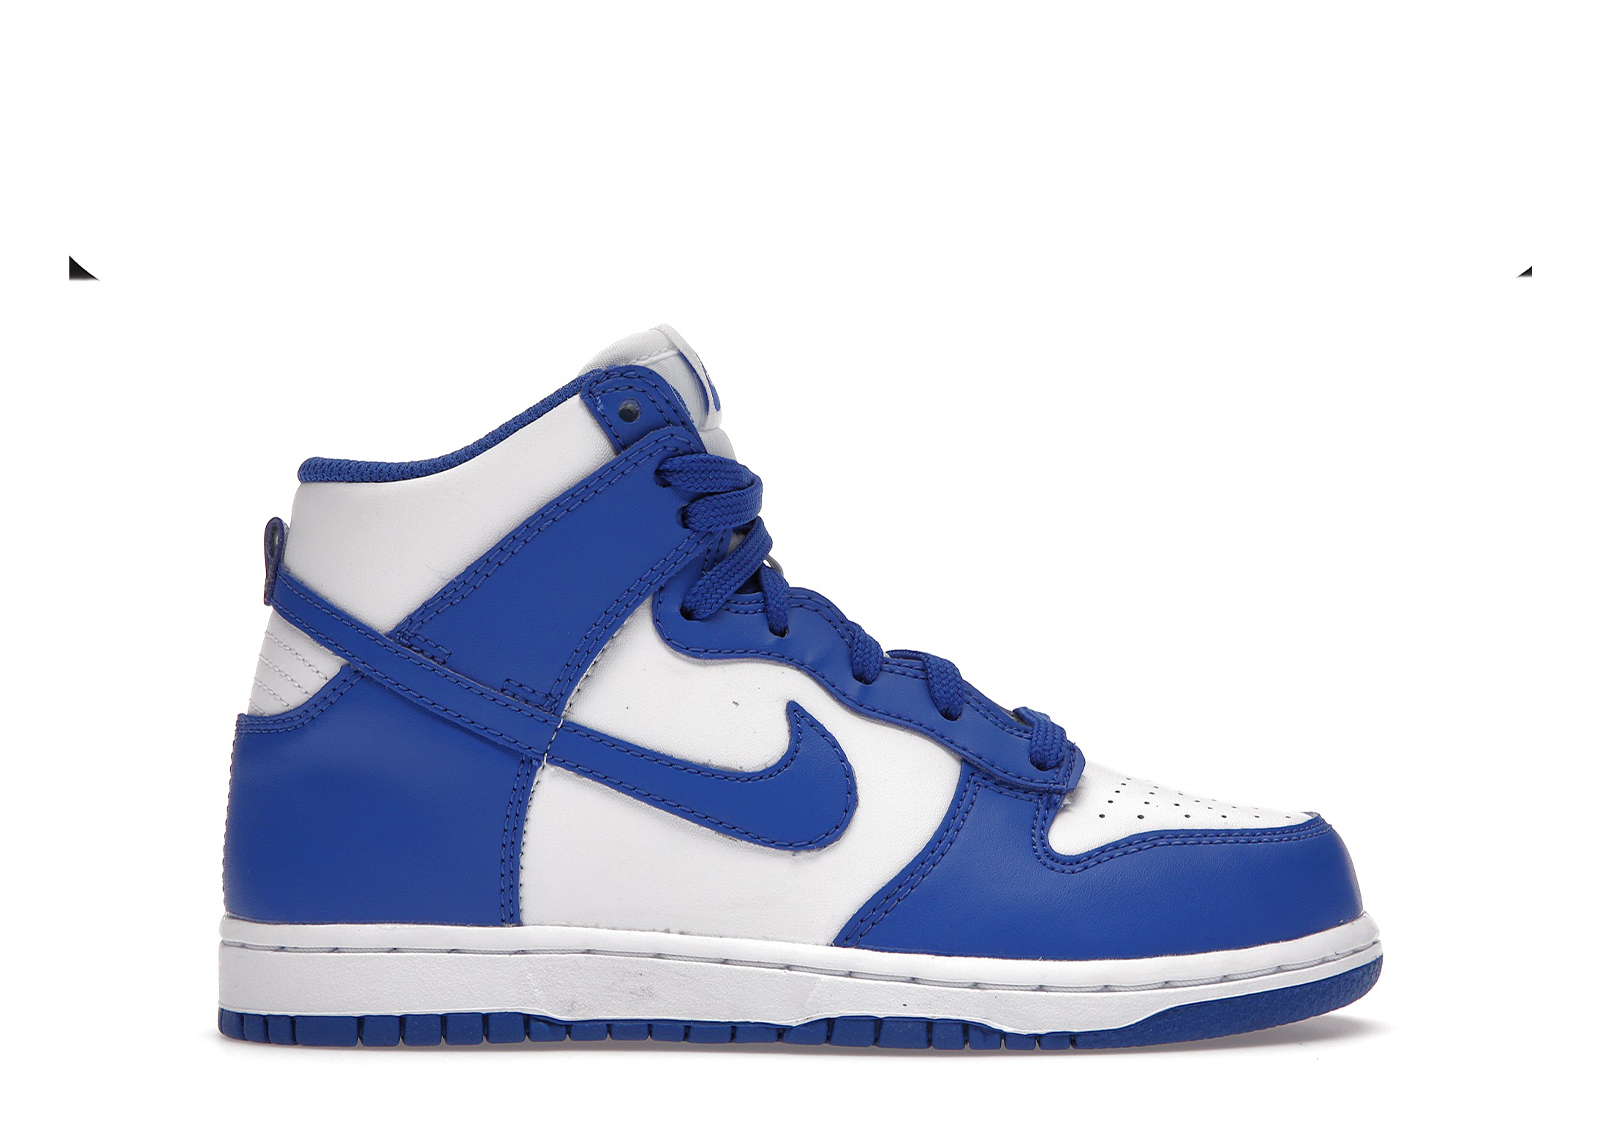 Nike Dunk High Electro Purple Midnght Navy (PS) Kids' - DH9753-100 